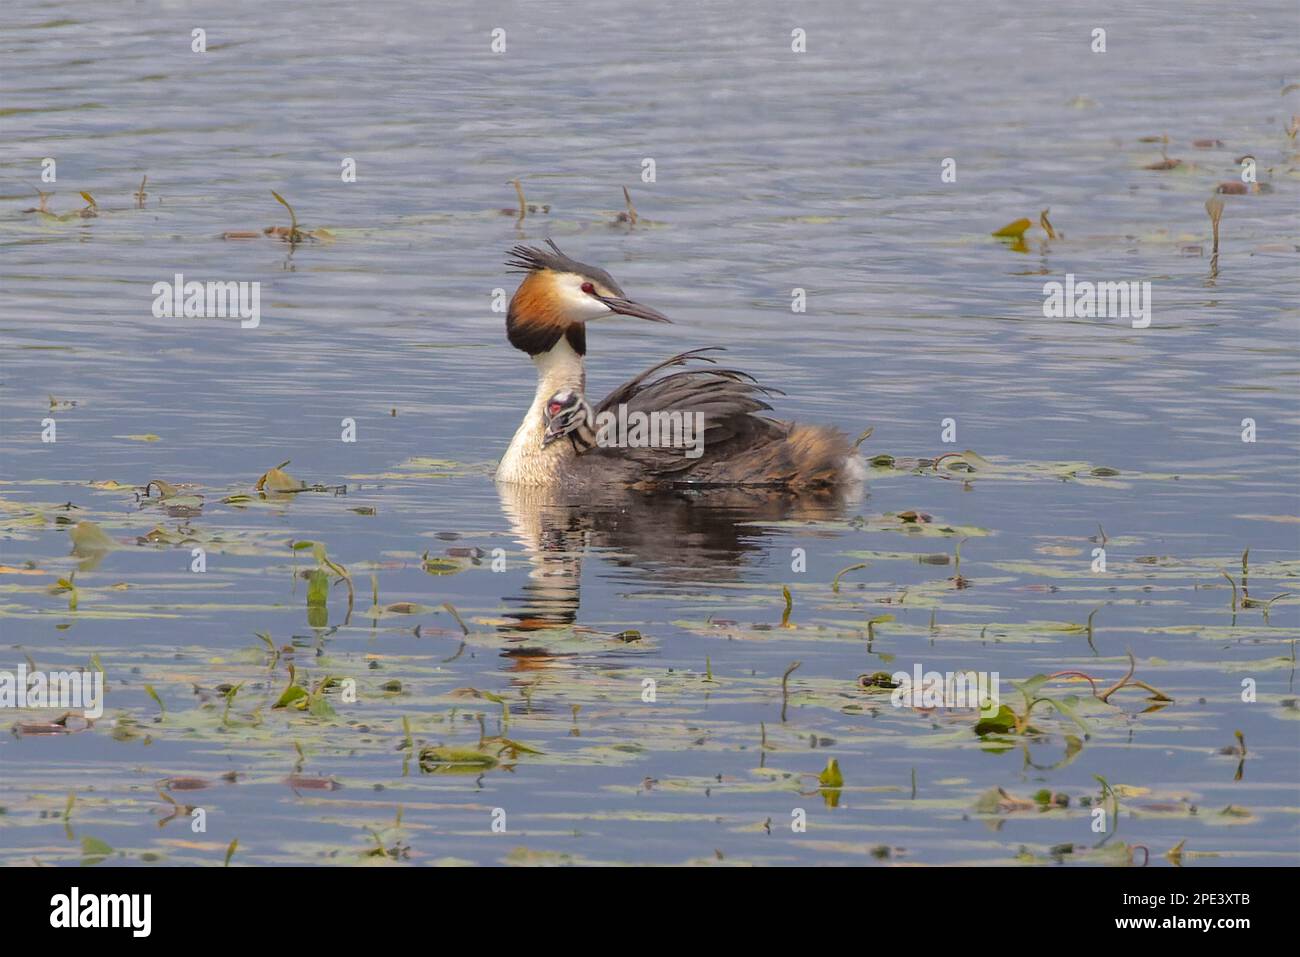 A great crested grebe with chick on its back Stock Photo